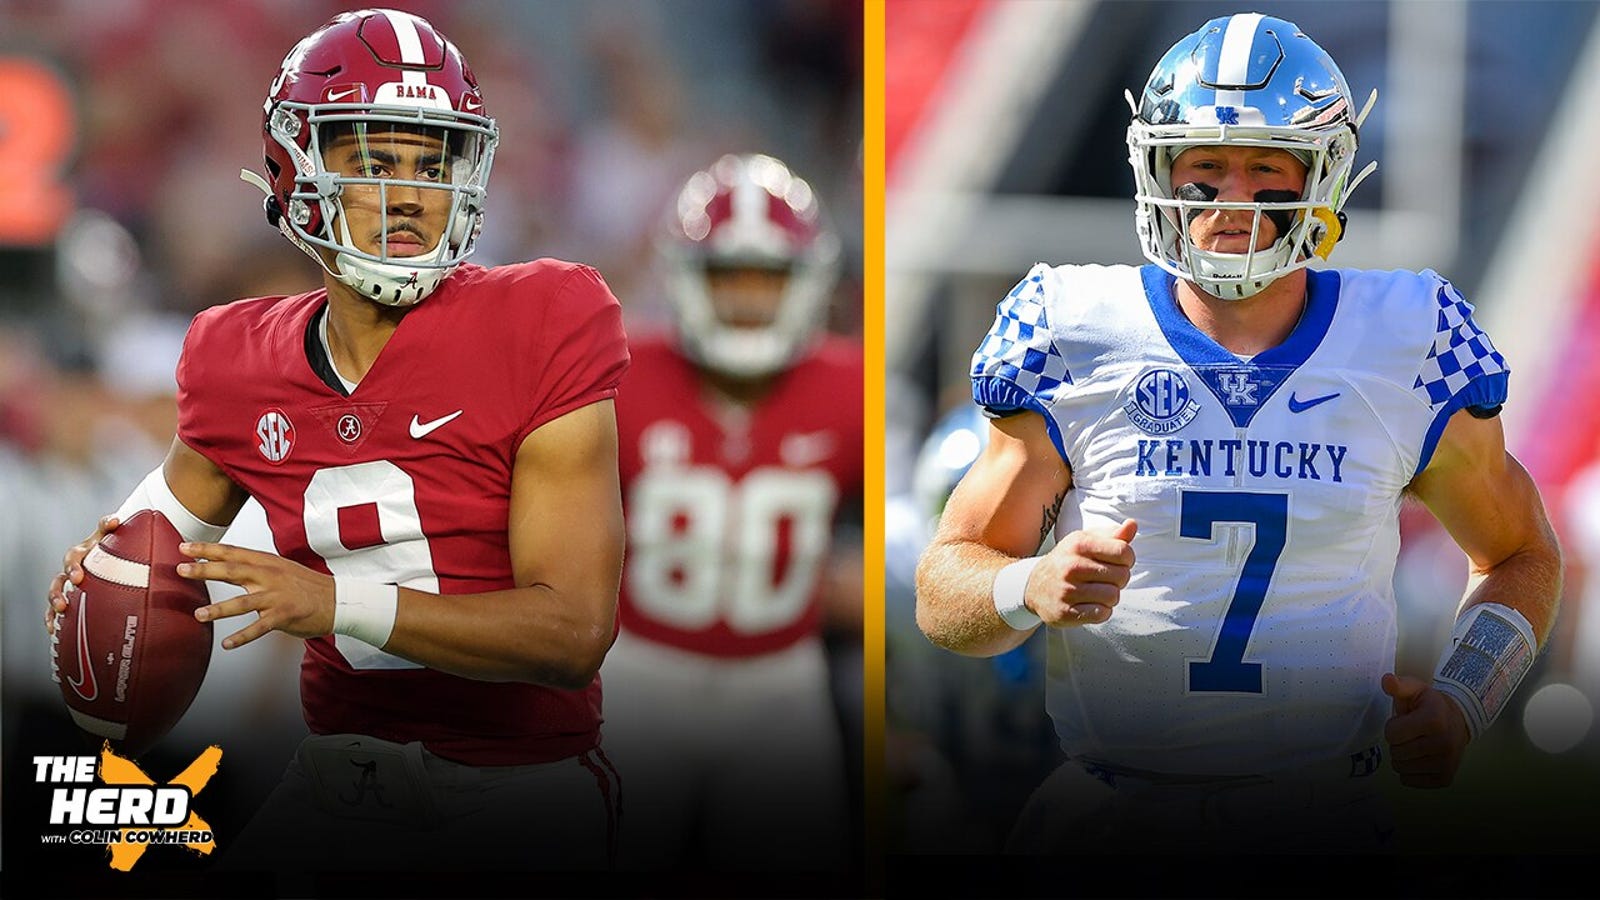 Who will be the first QB selected in the NFL Draft?